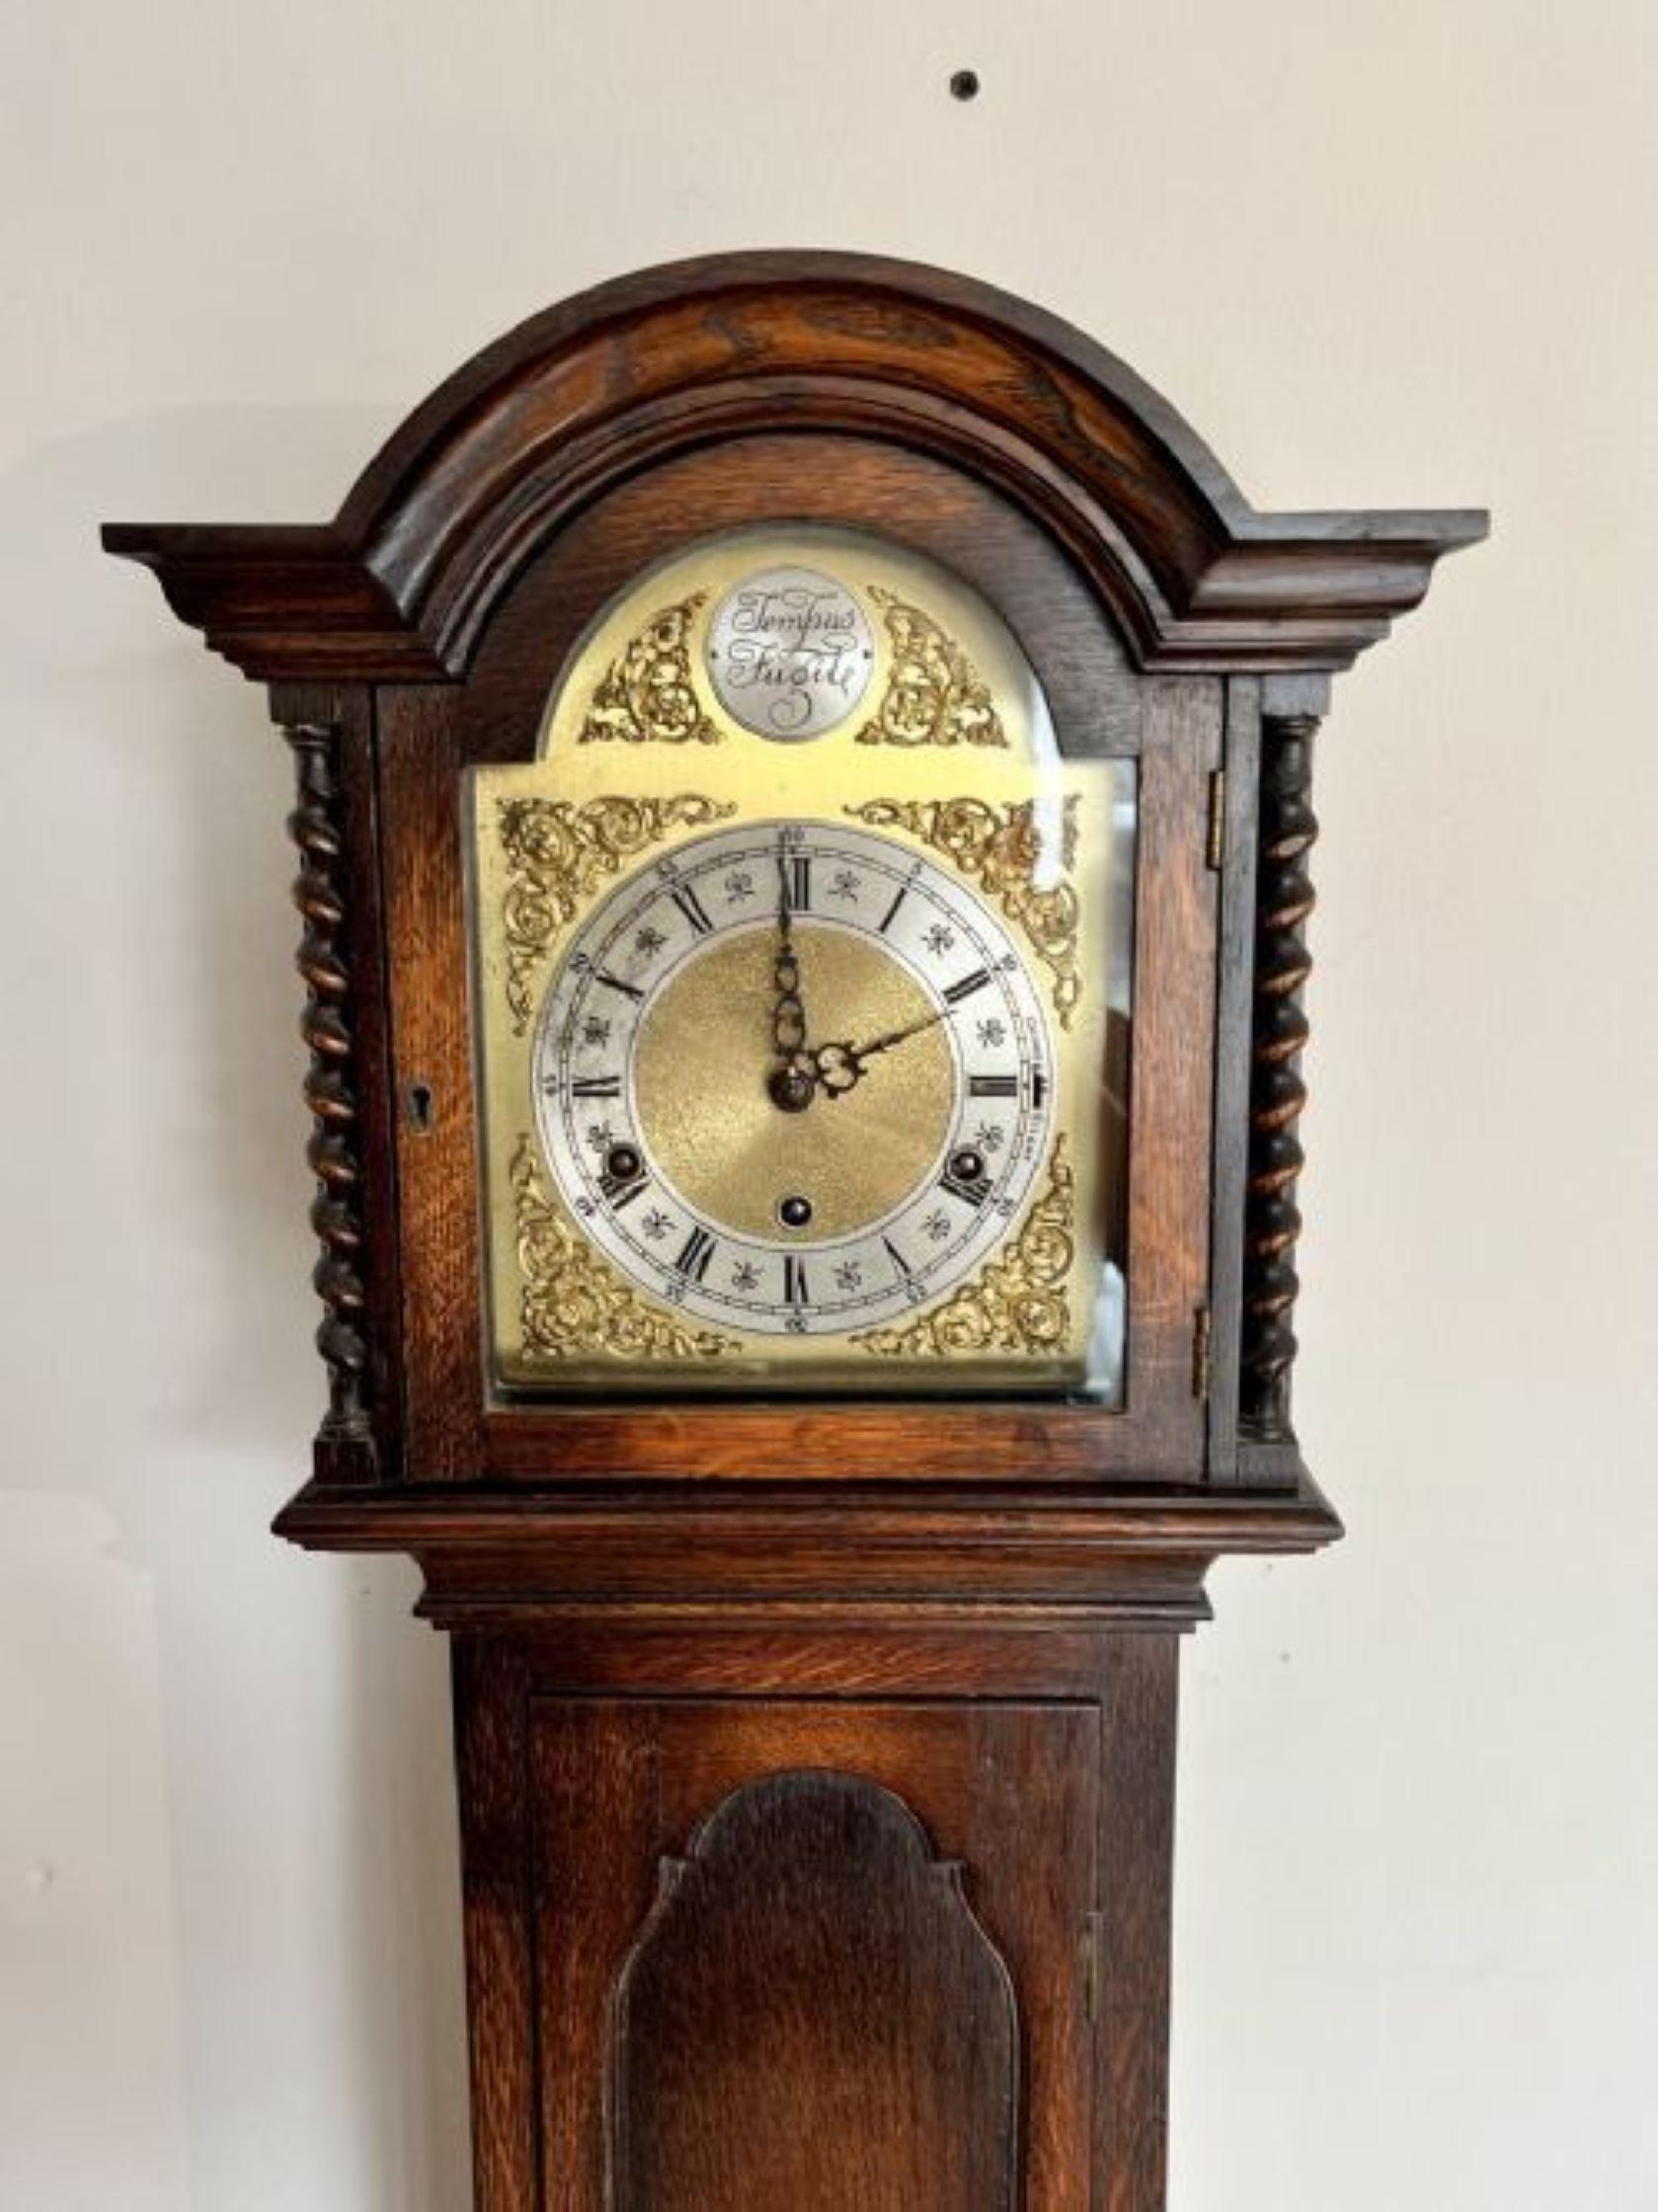 Fine Quality Antique Oak 8 Day Chiming Grandmother Clock having a superb quality oak case with carved mouldings and fine barley twist columns, quality square feet with an ornate dial and a arched brass face with ornate spandrels and inscribed